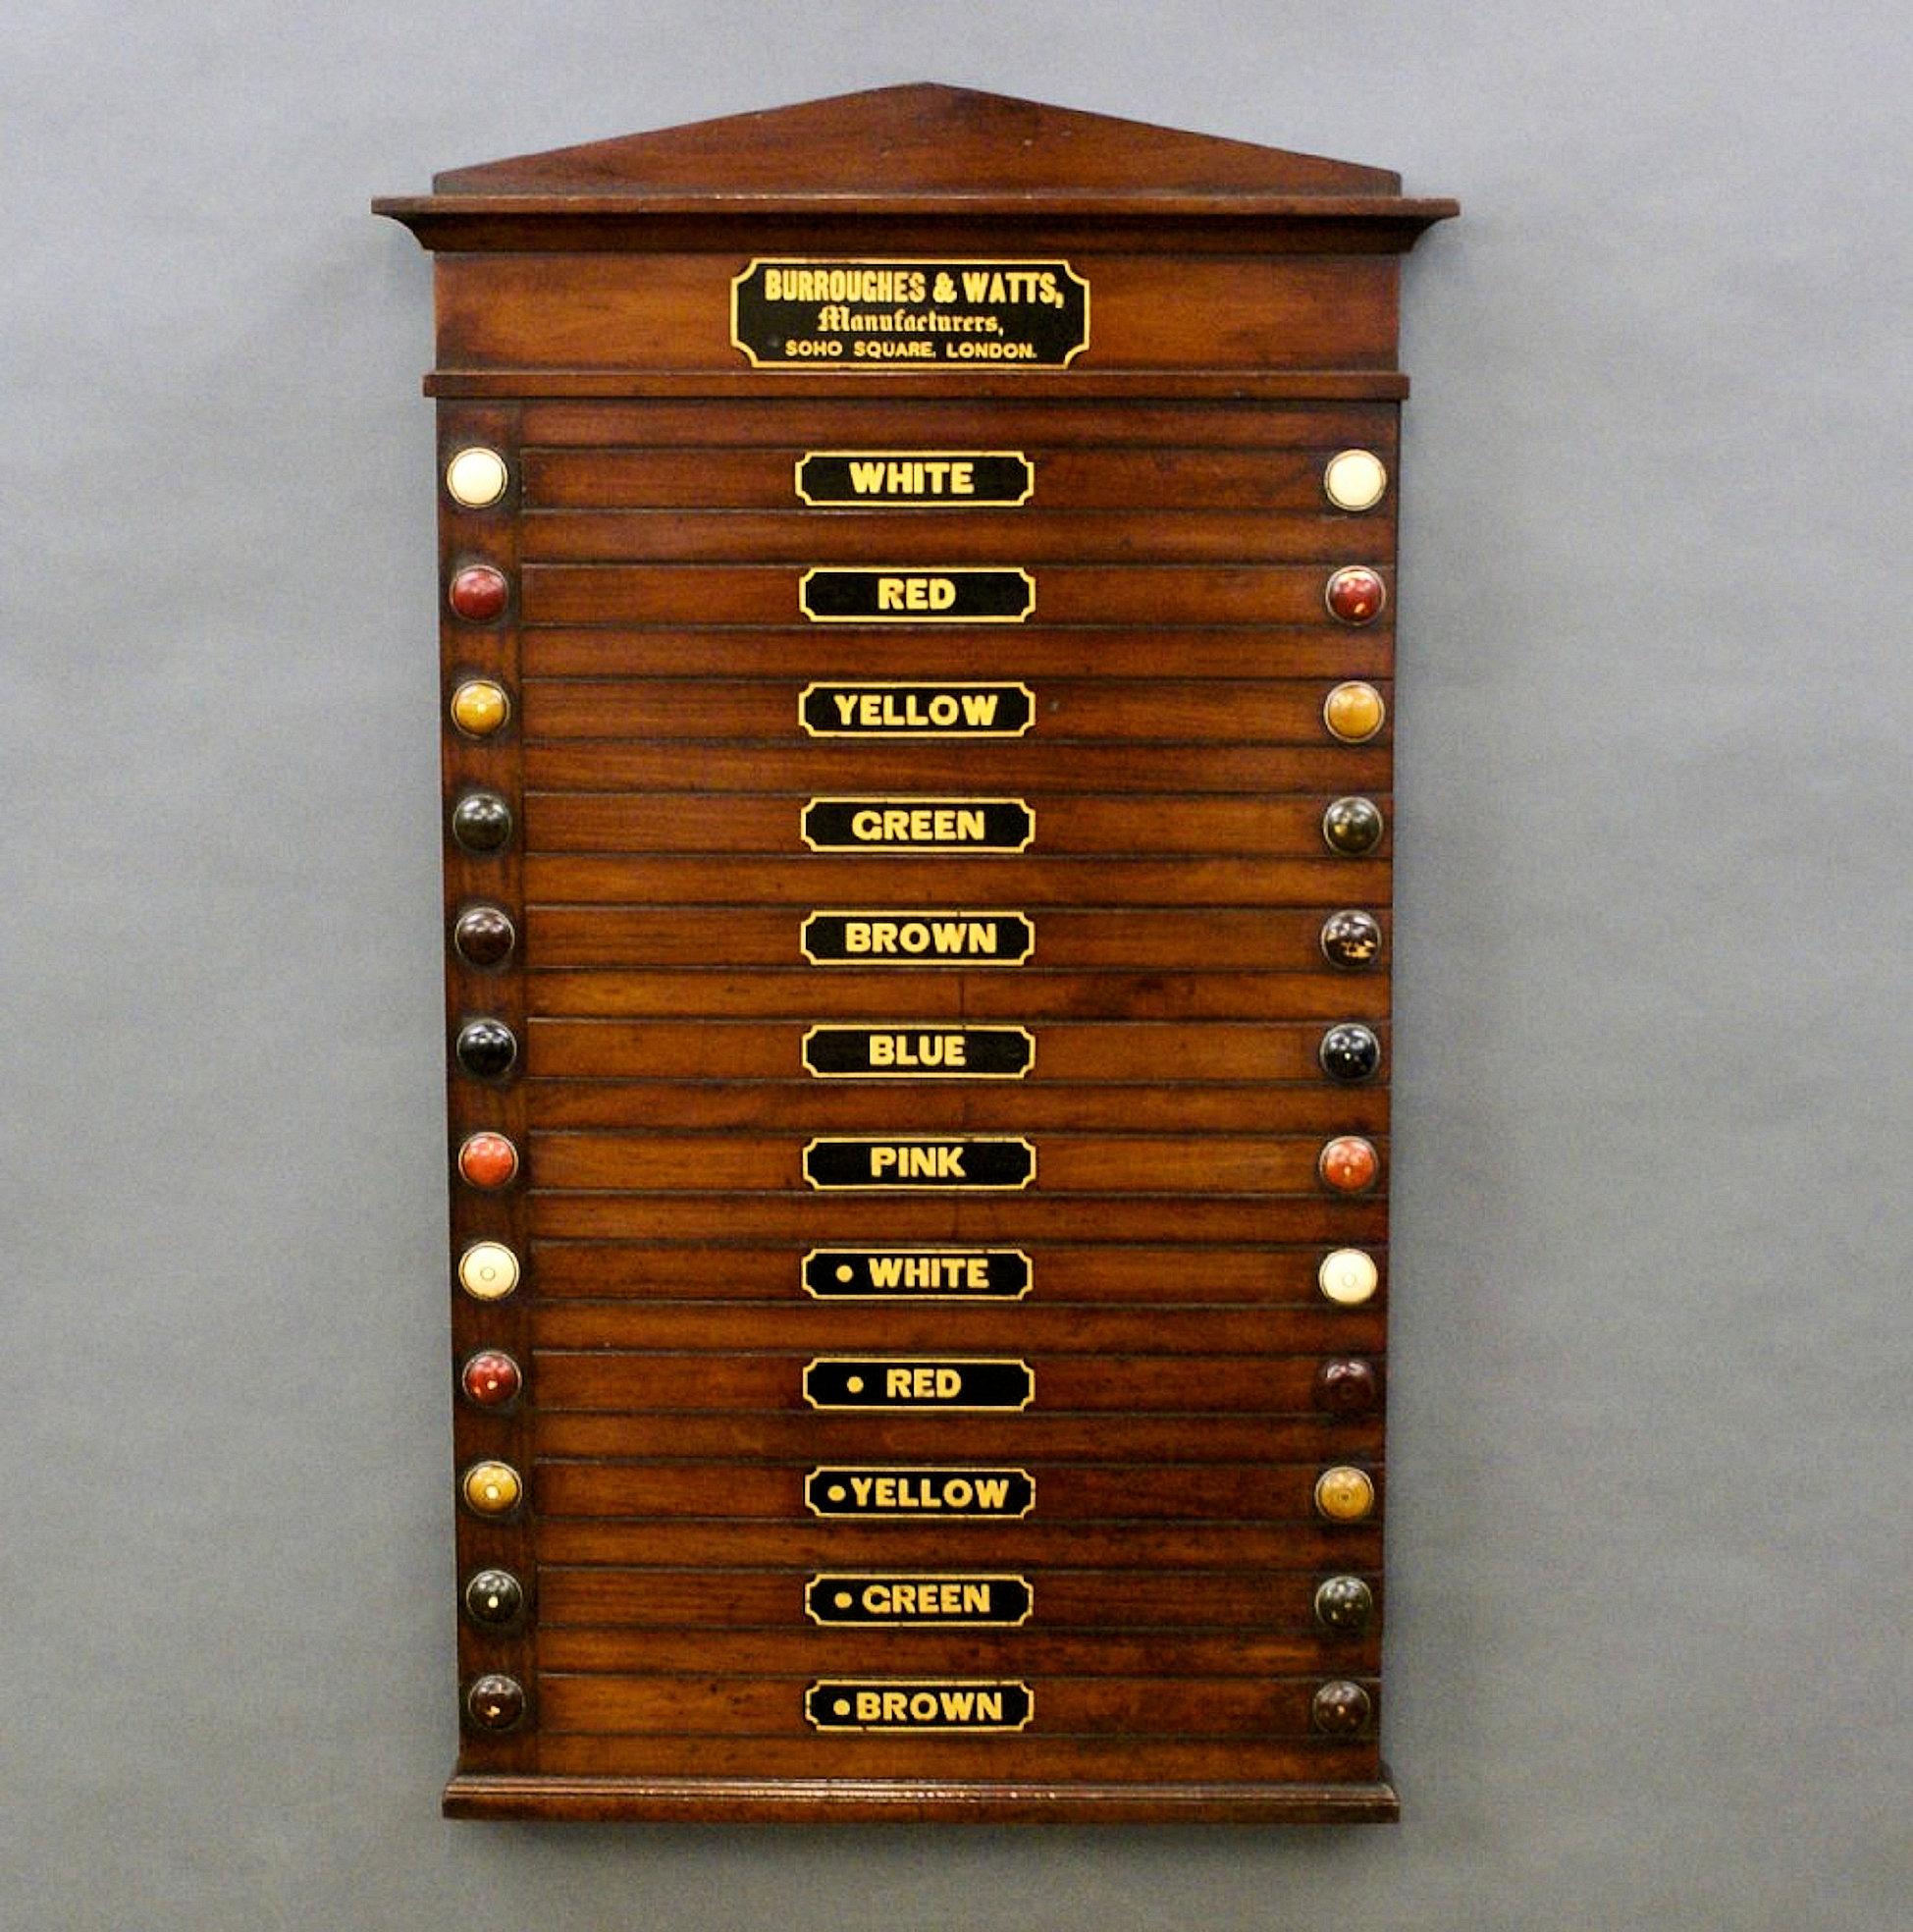 This rare Victorian mahogany 12 player life pool scoreboard features sliders that open to reveal counters and stars. The makers, Burroughes & Watts, are a well known and famous manufacturer of billiard tables of the period that are still producing